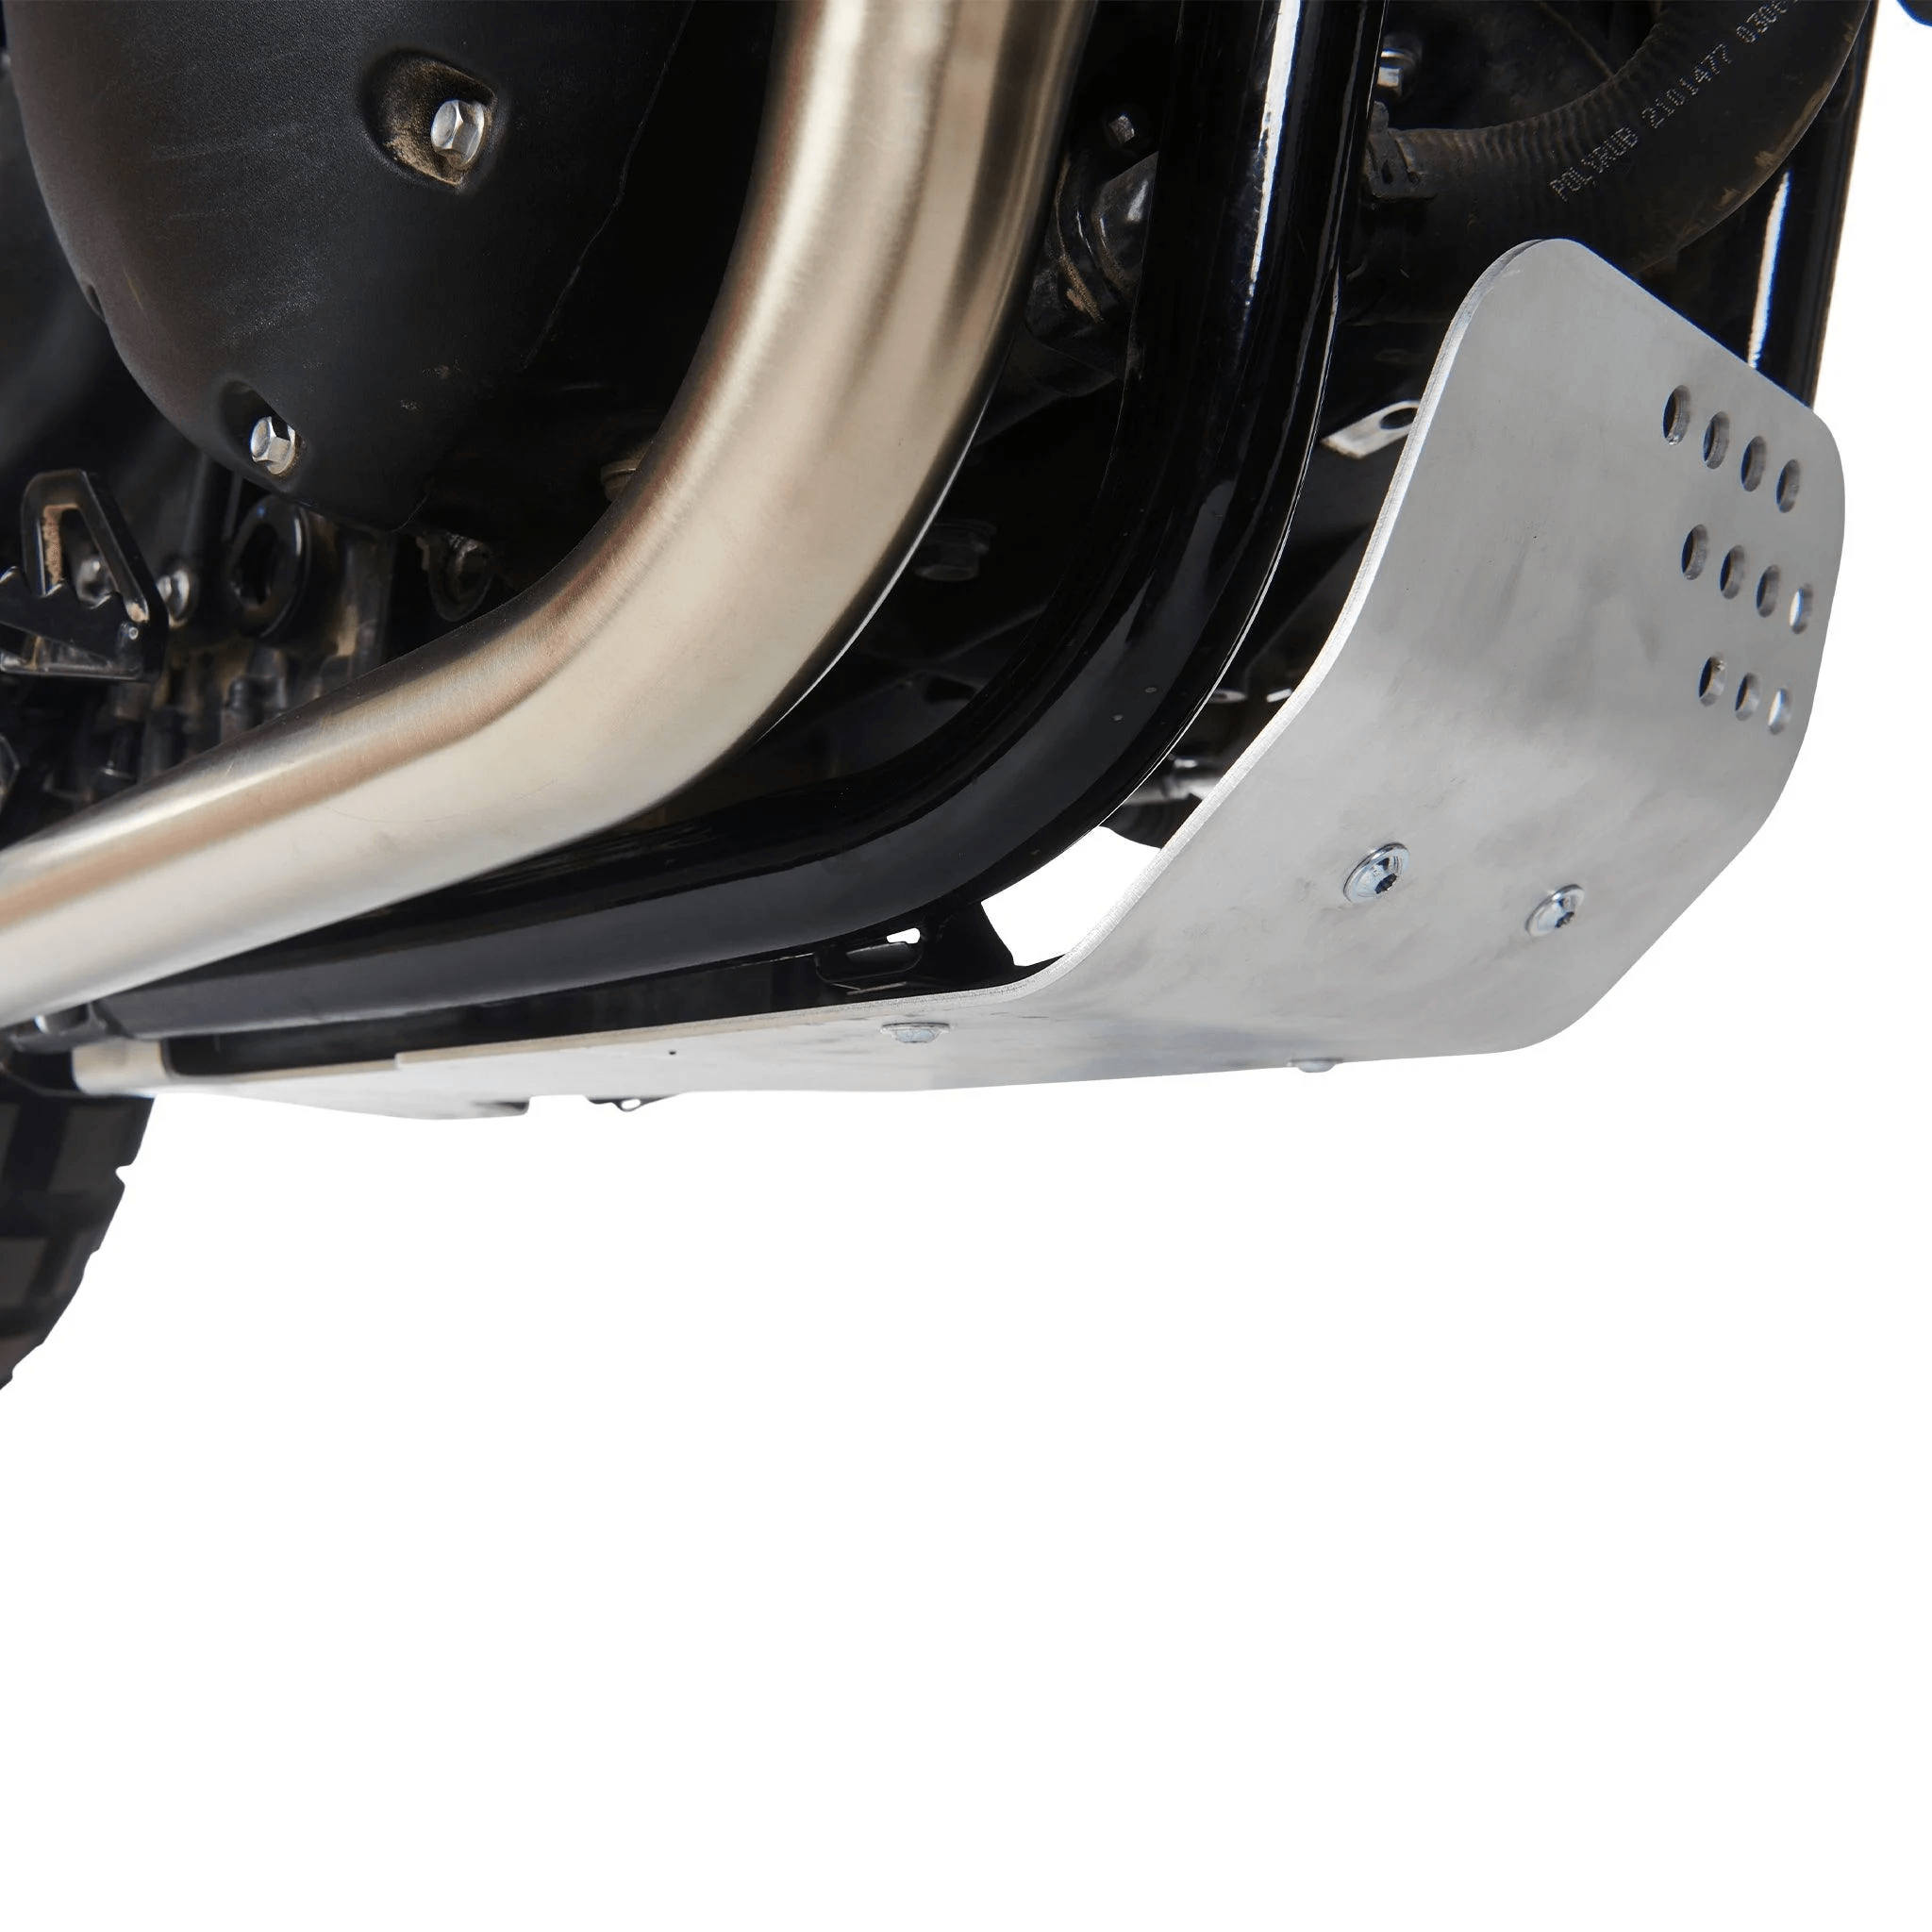 SW Motech Skid Plate for Triumph Motorcycles (2016+) - British Customs